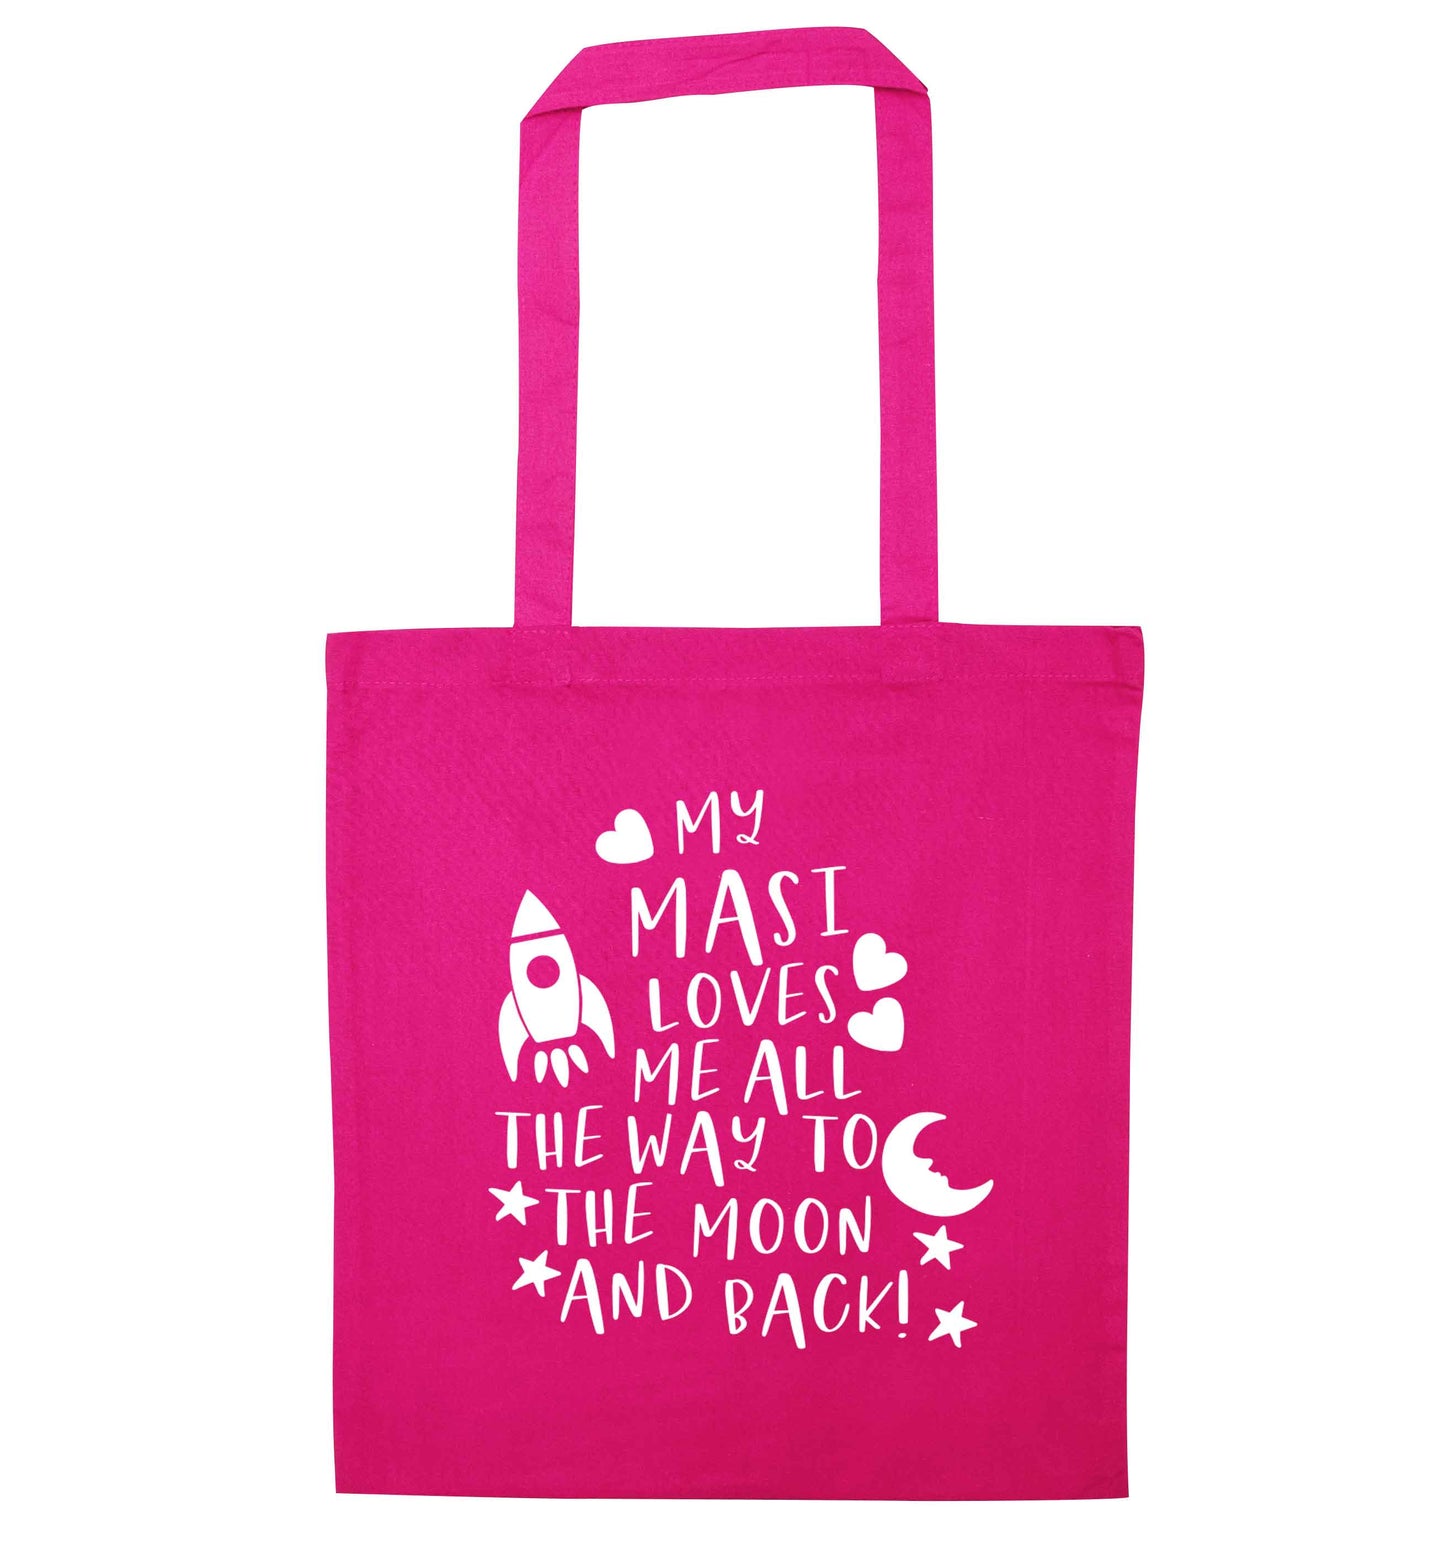 My masi loves me all the way to the moon and back pink tote bag